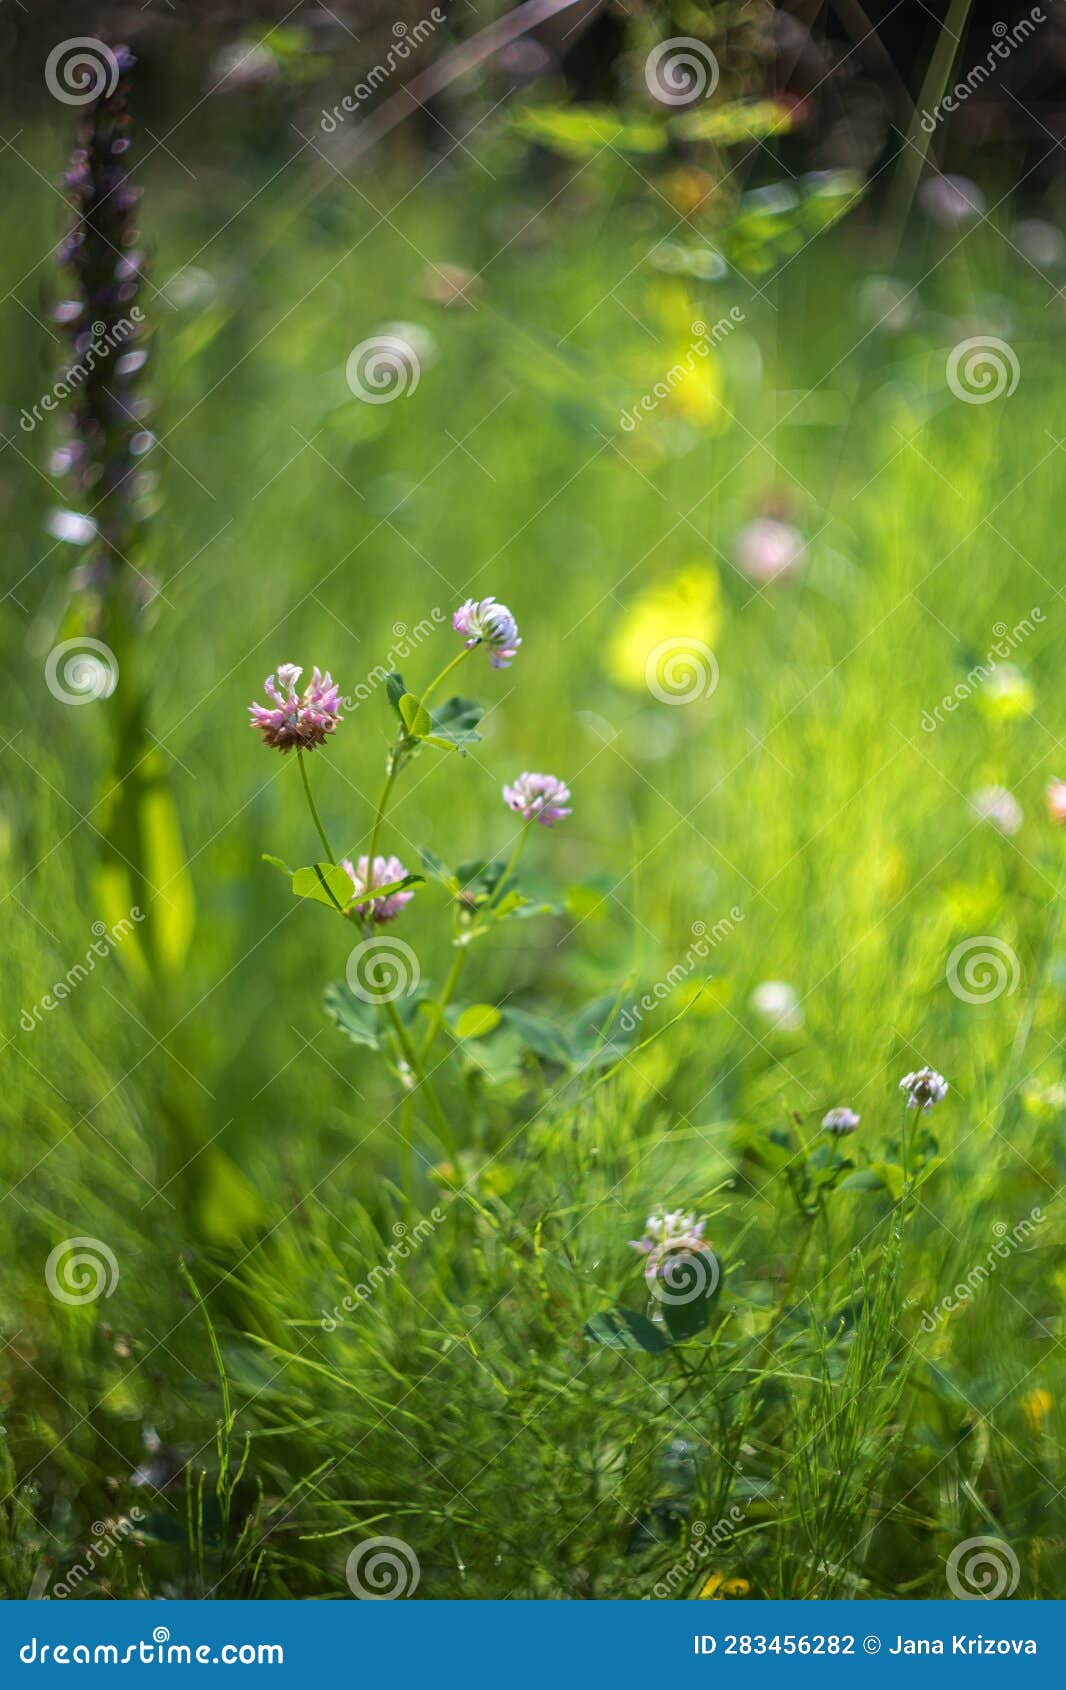 trifolium pratense - pink clover flowers of a meadow flower growing in a summer meadow in the background of a beautiful soft bokeh